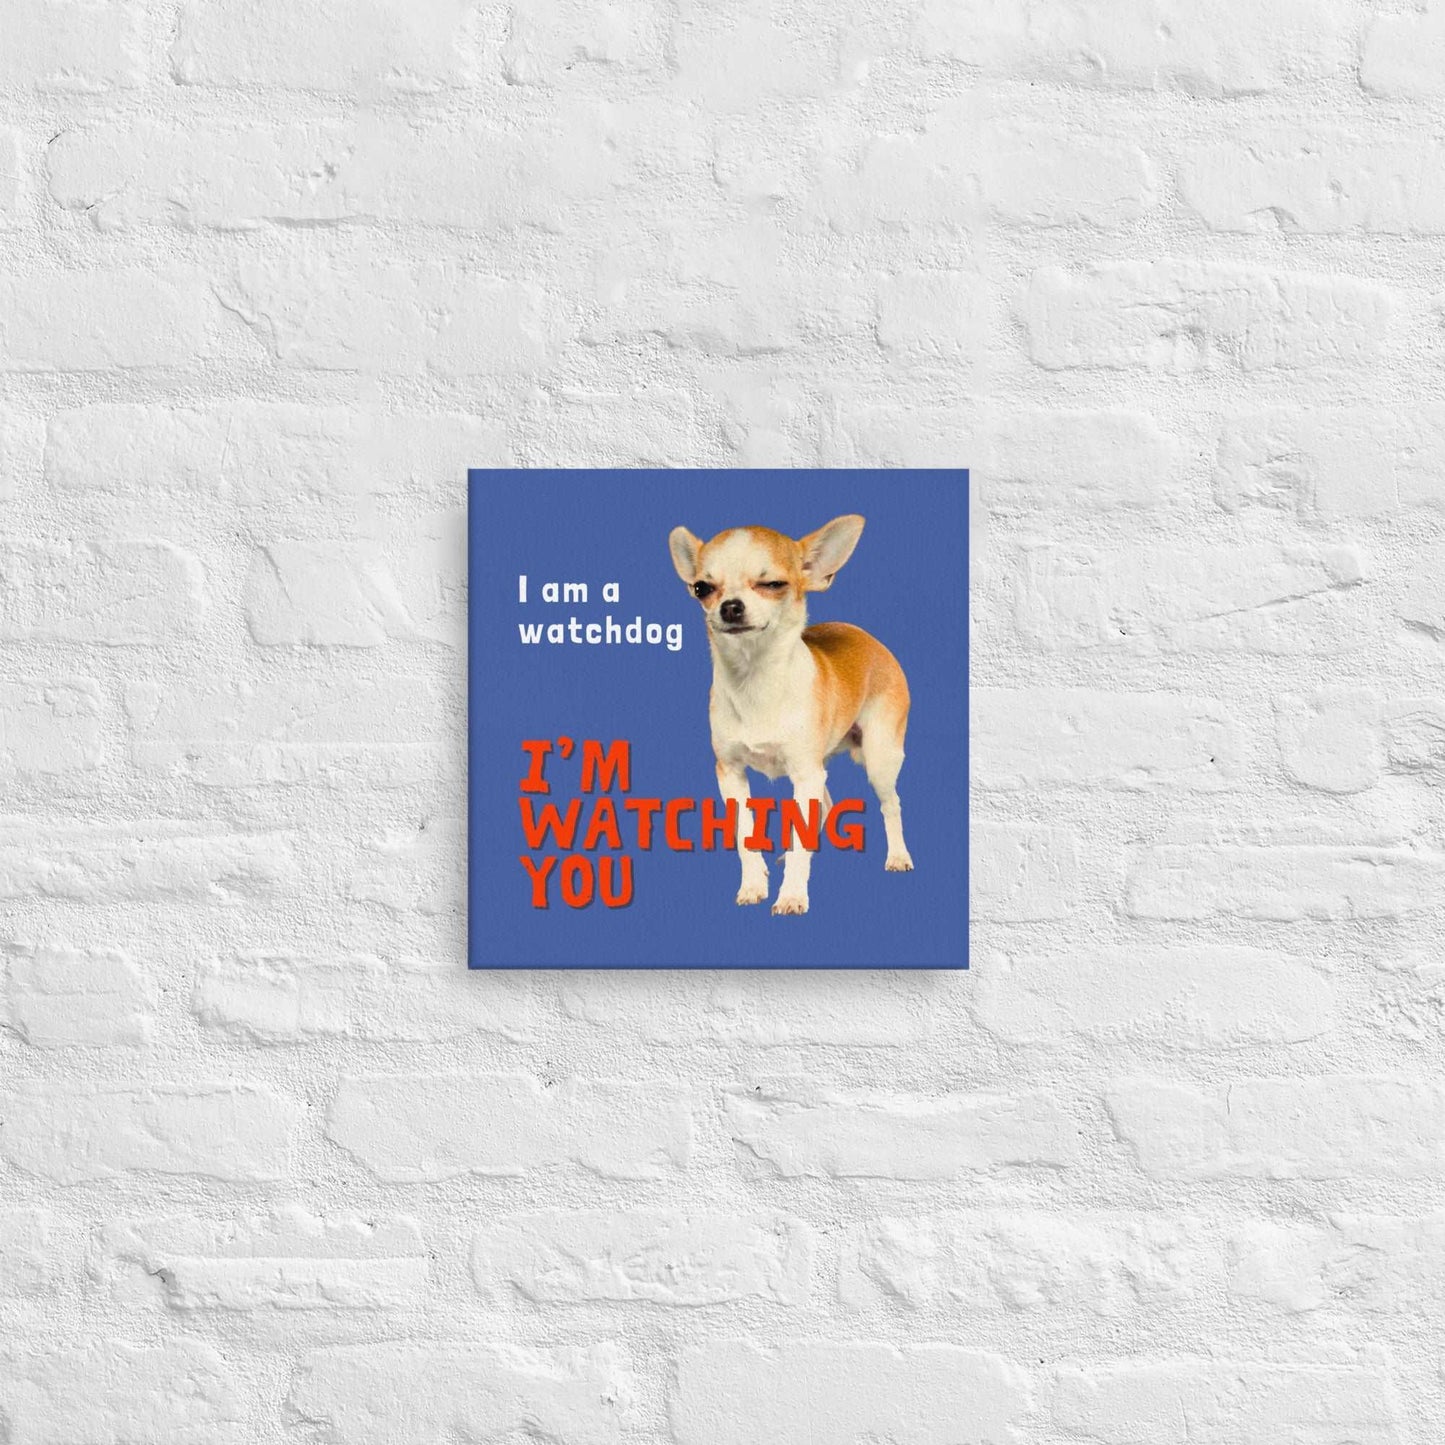 I am a watchdog; I'M WATCHING YOU - one of the famous Chimigos chihuahua memes.  This is a vivid and fade resistant art print on a stretched canvas. A cheeky gold, fawn and white shorthair chihuahua winks as they inform visitors that they will be watching their every move. A funny and stylish gift idea for someone whose house is presided over by a feisty and alert little chi. Perfect for the new chihuahua parent or as a housewarming gift!